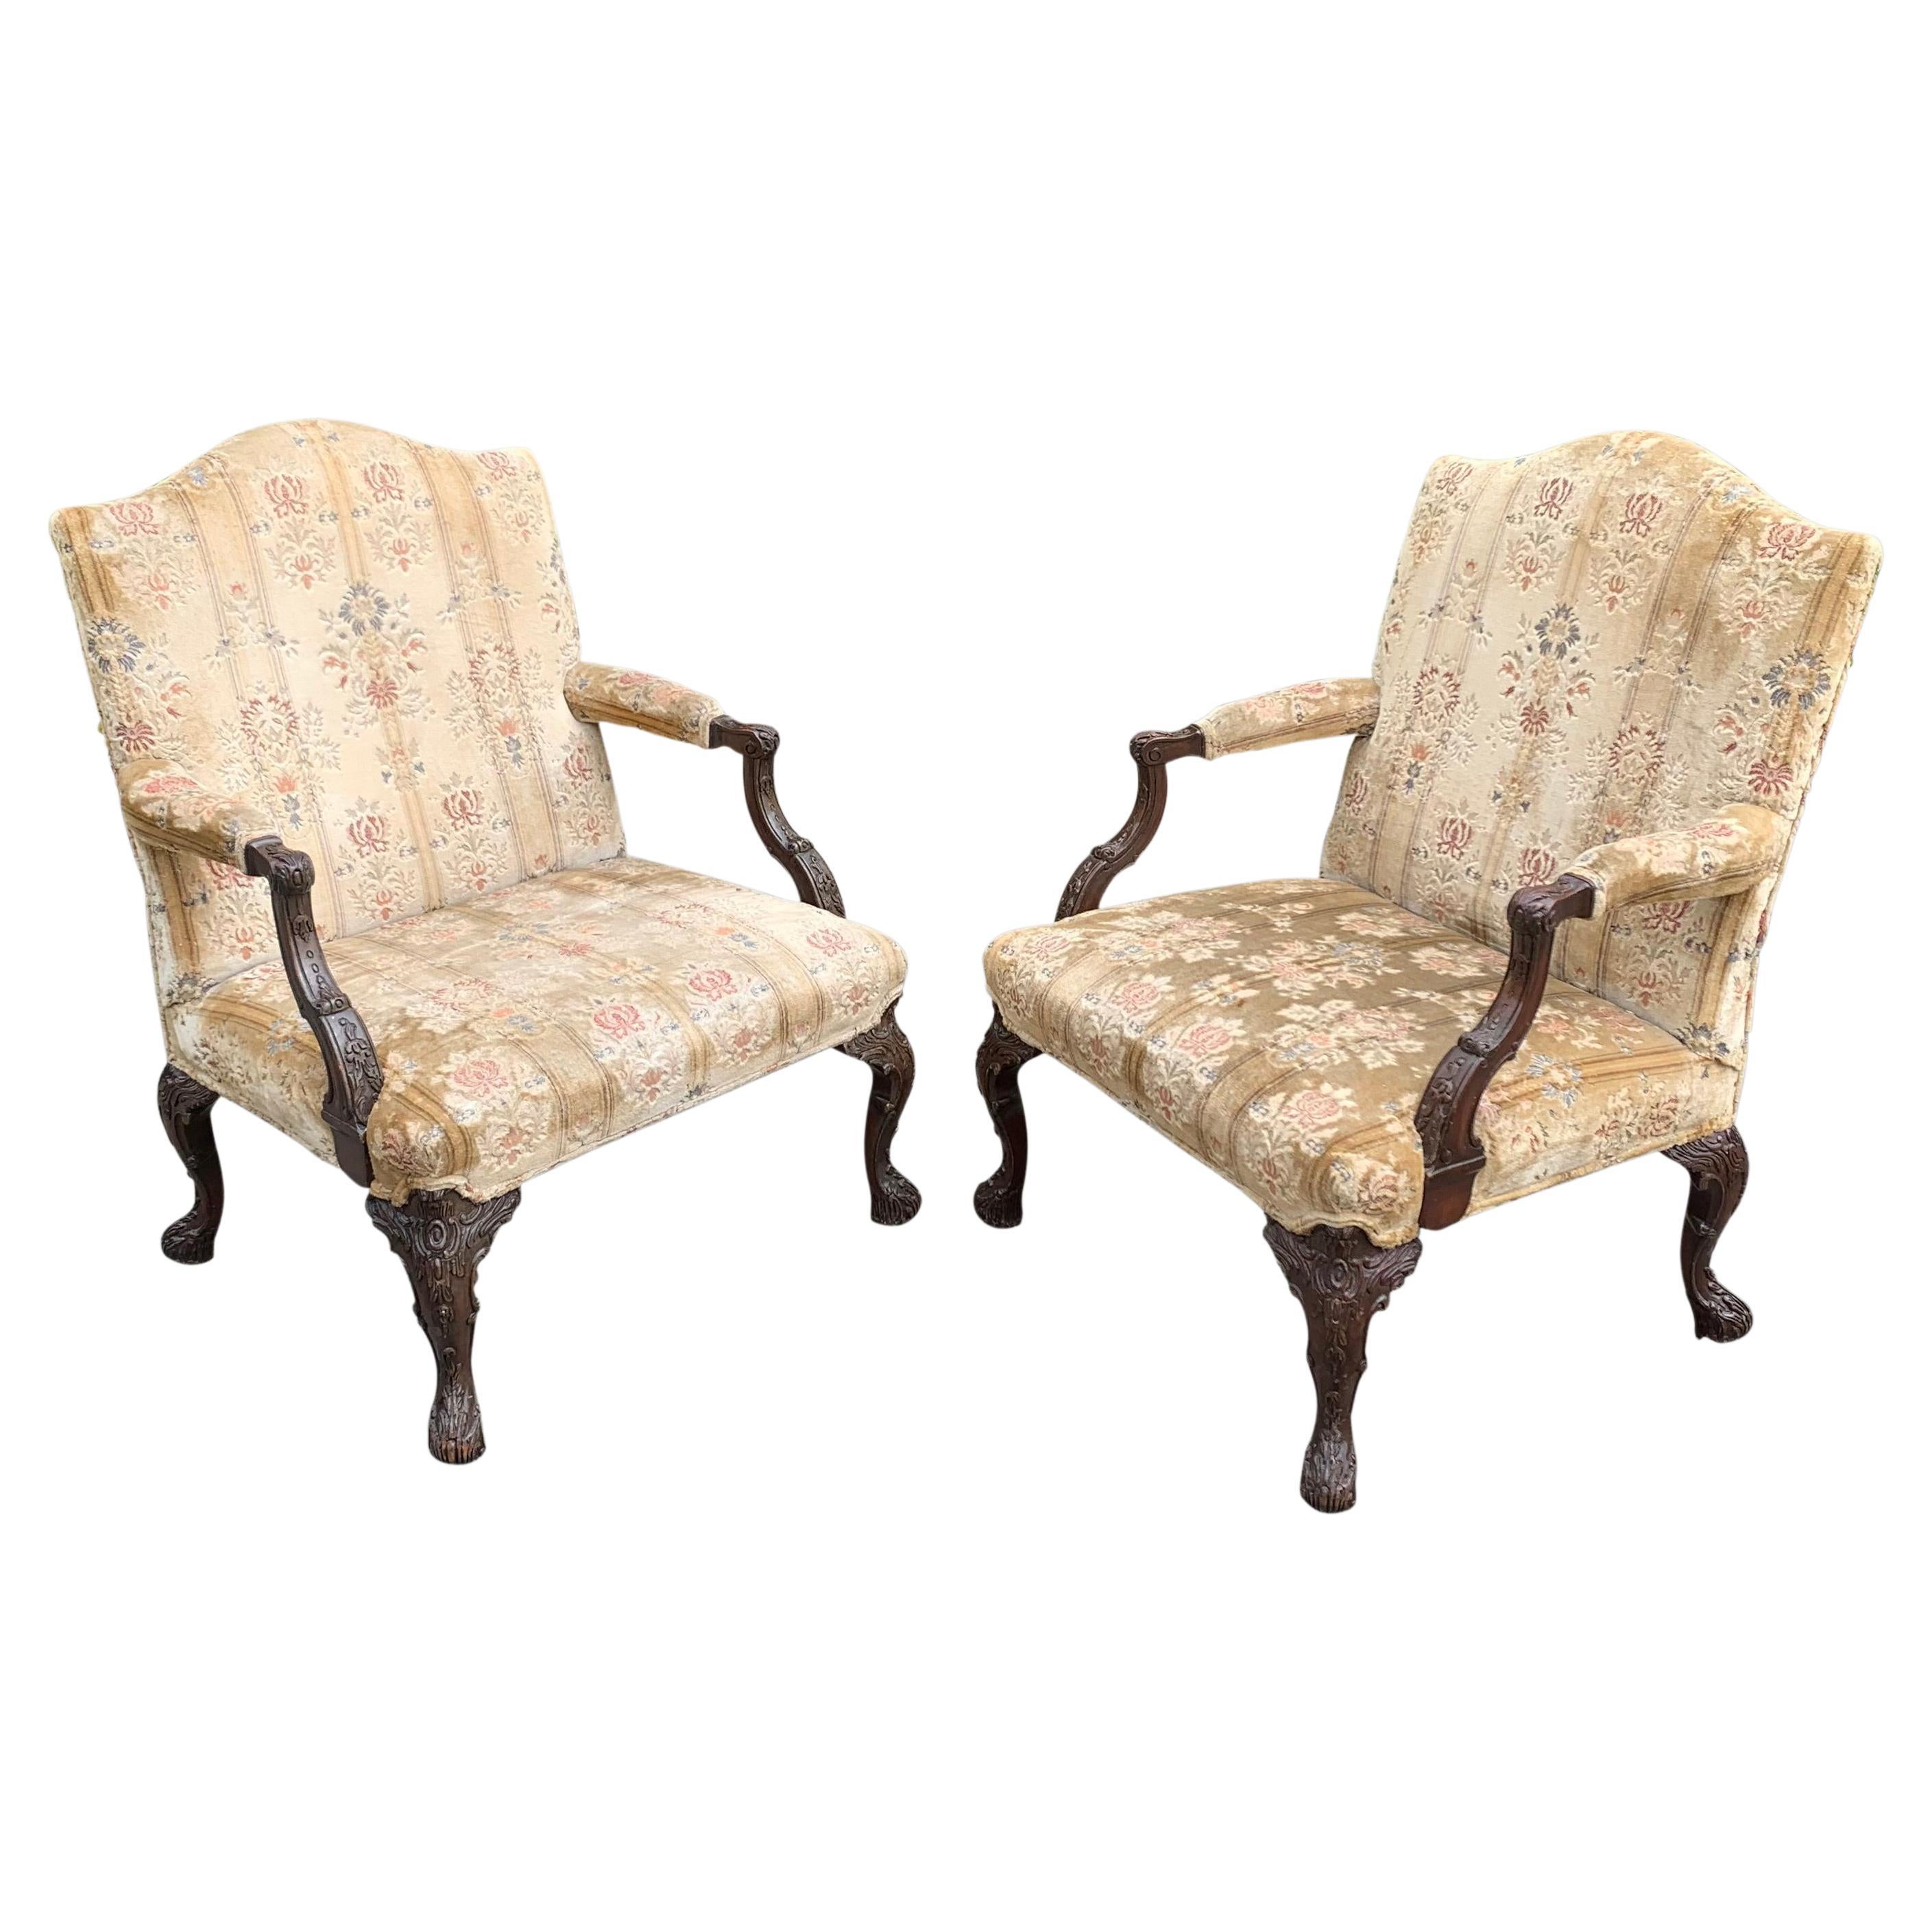 Pair of Gainsborough Library chairs in the Chippendale taste